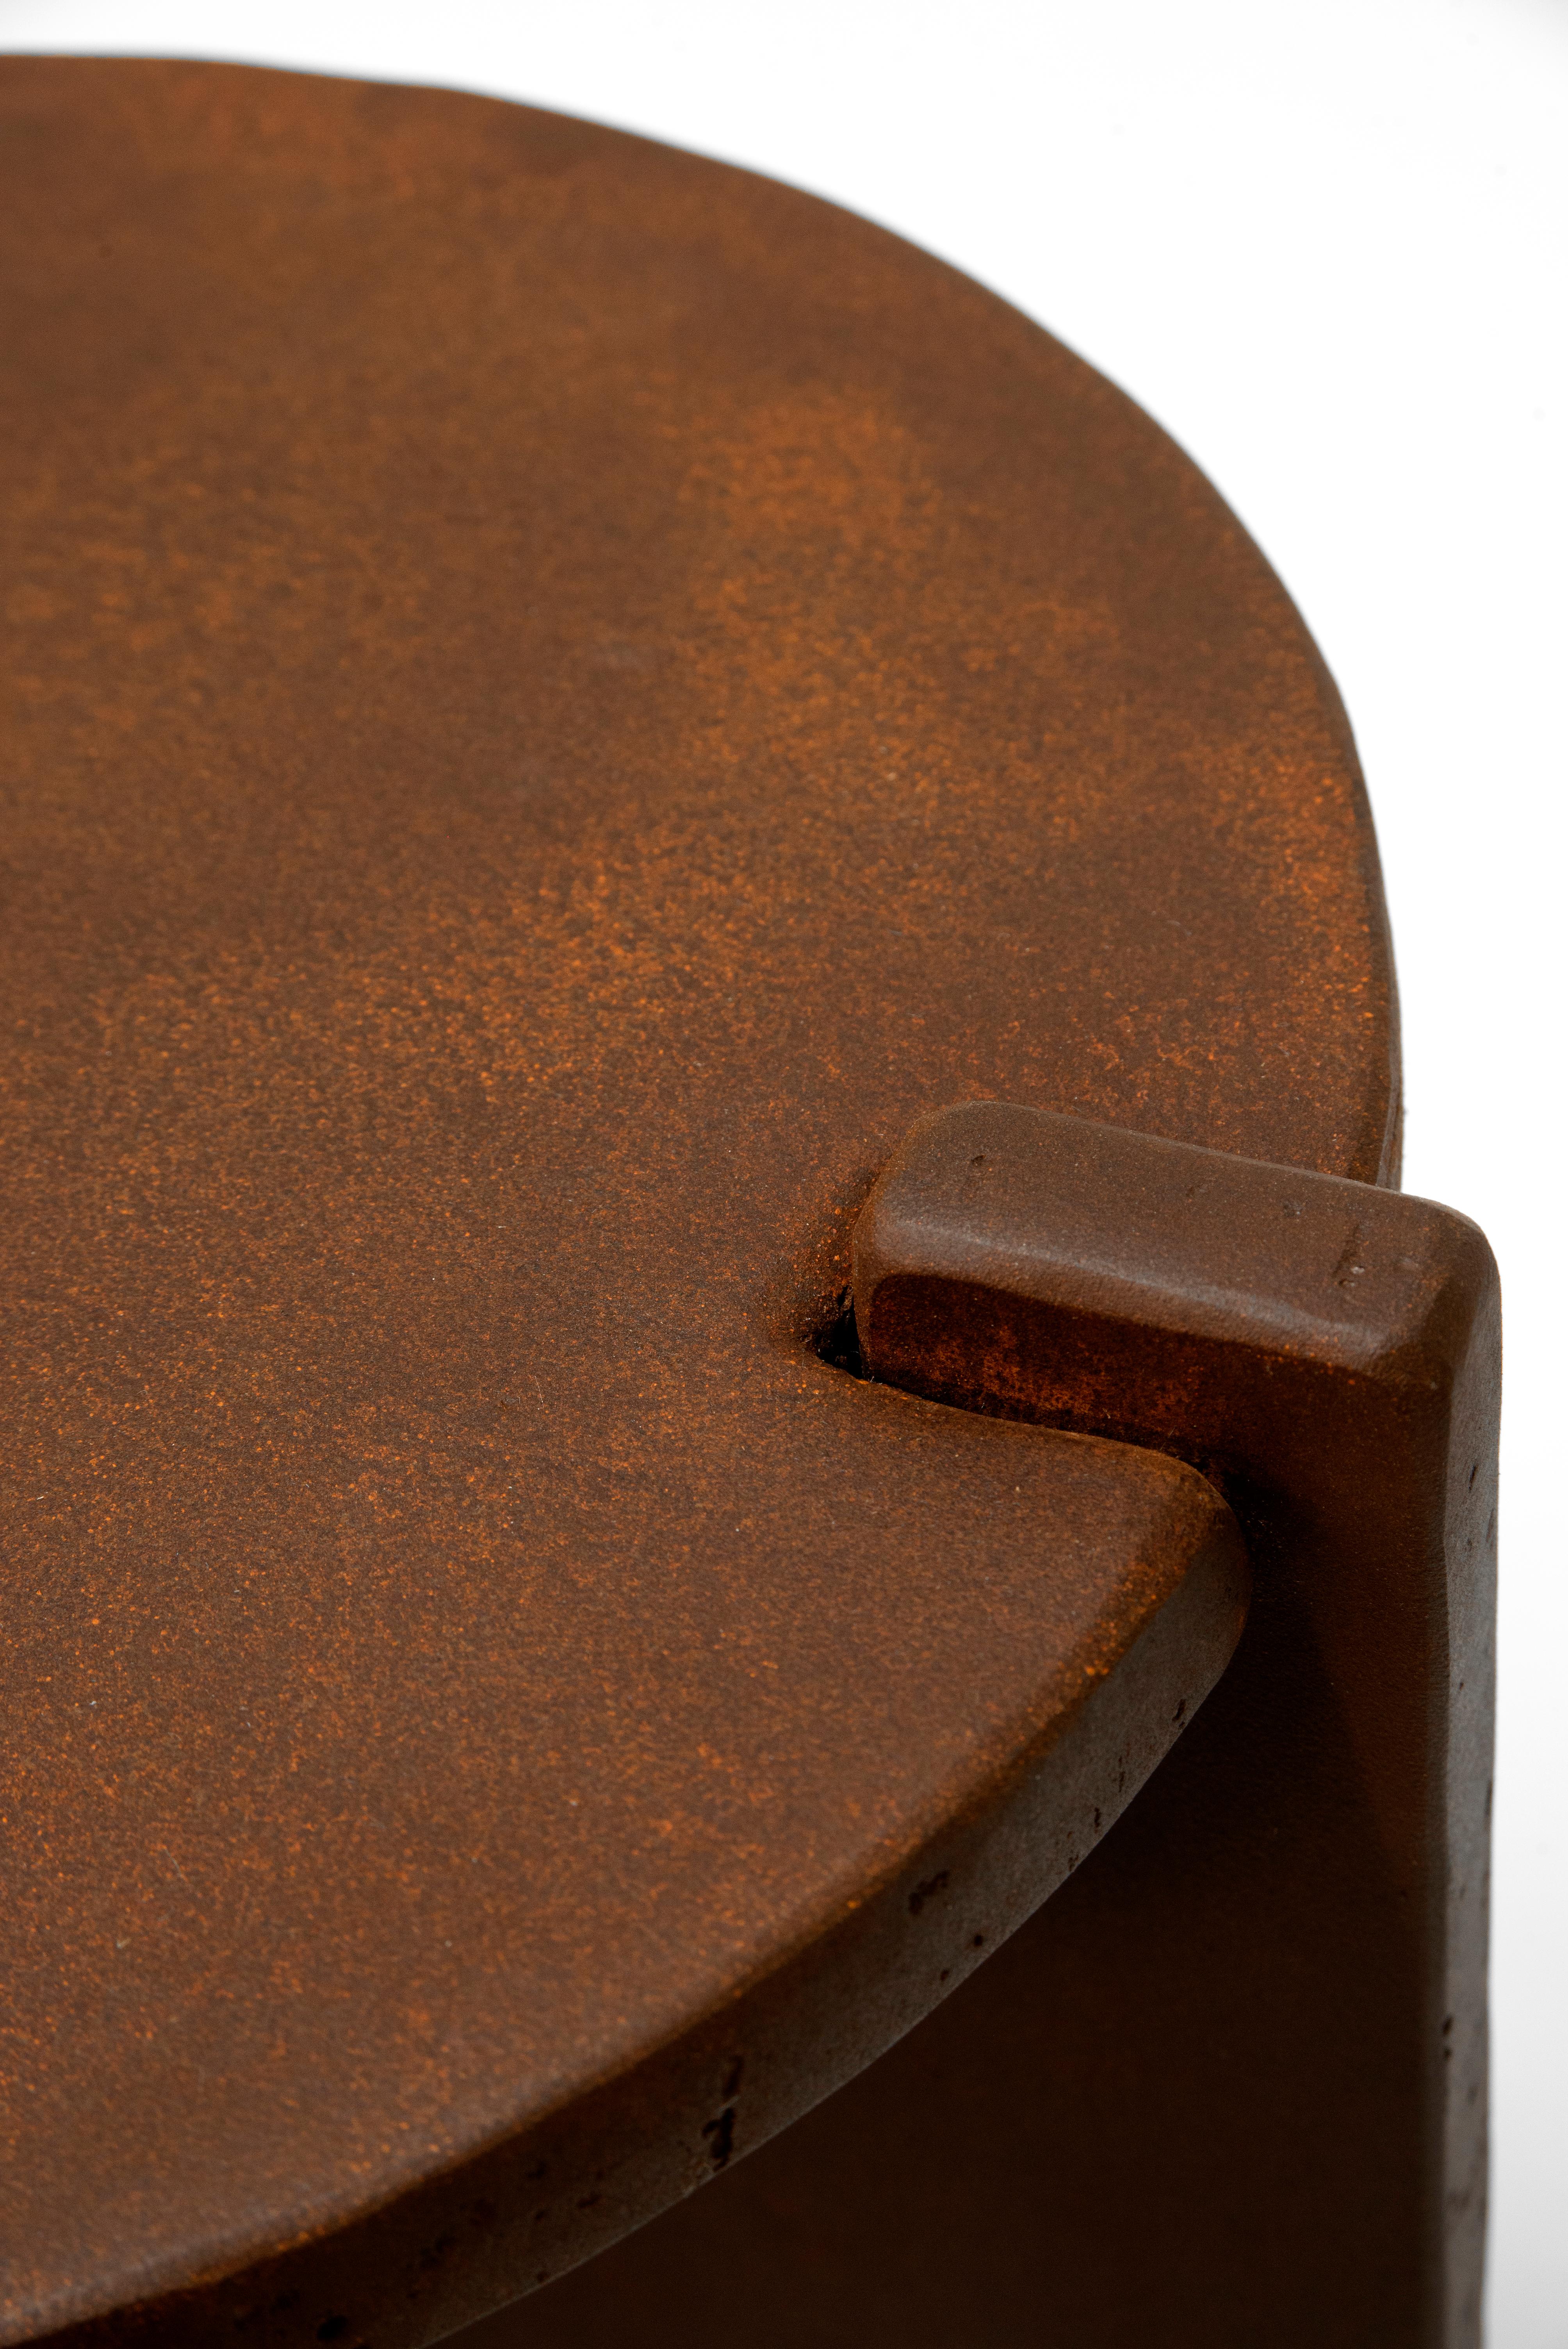 American Cocktail Table Modern Hand-Shaped Round Handmade Corten Rust Steel For Sale